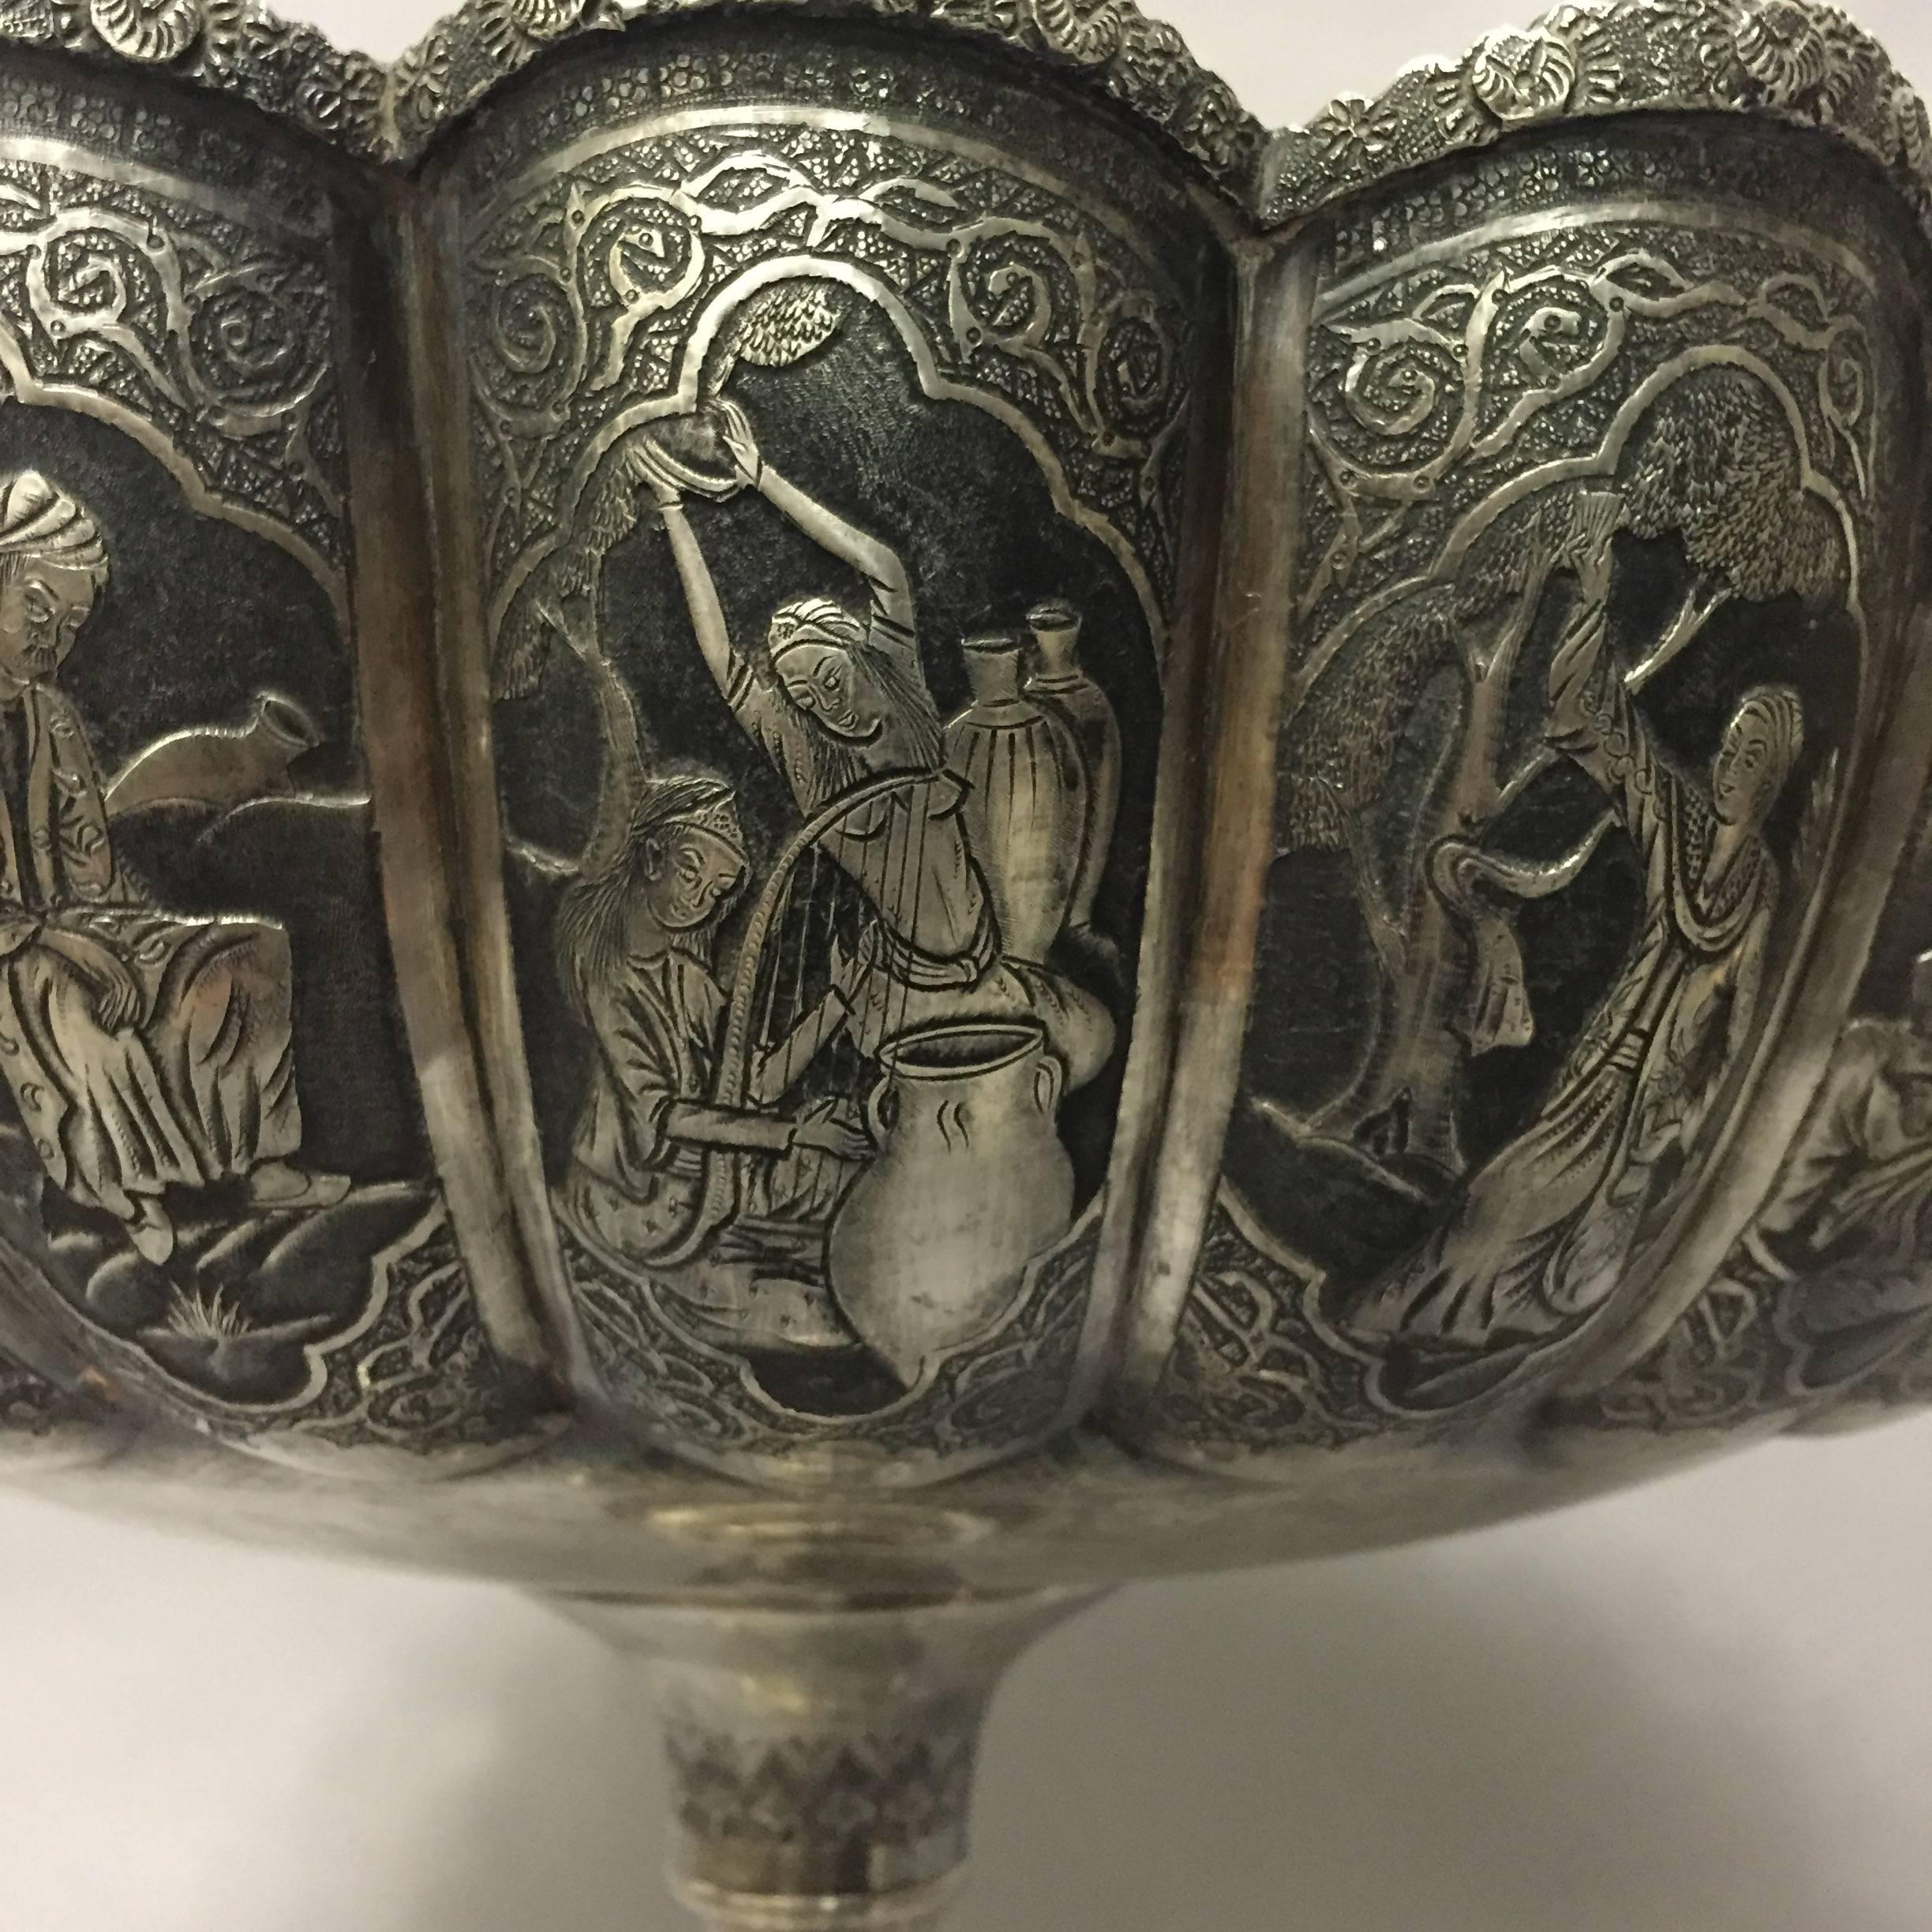 Hand-Crafted 19th Century Iranian Solid Silver by the Great Master Parvarish